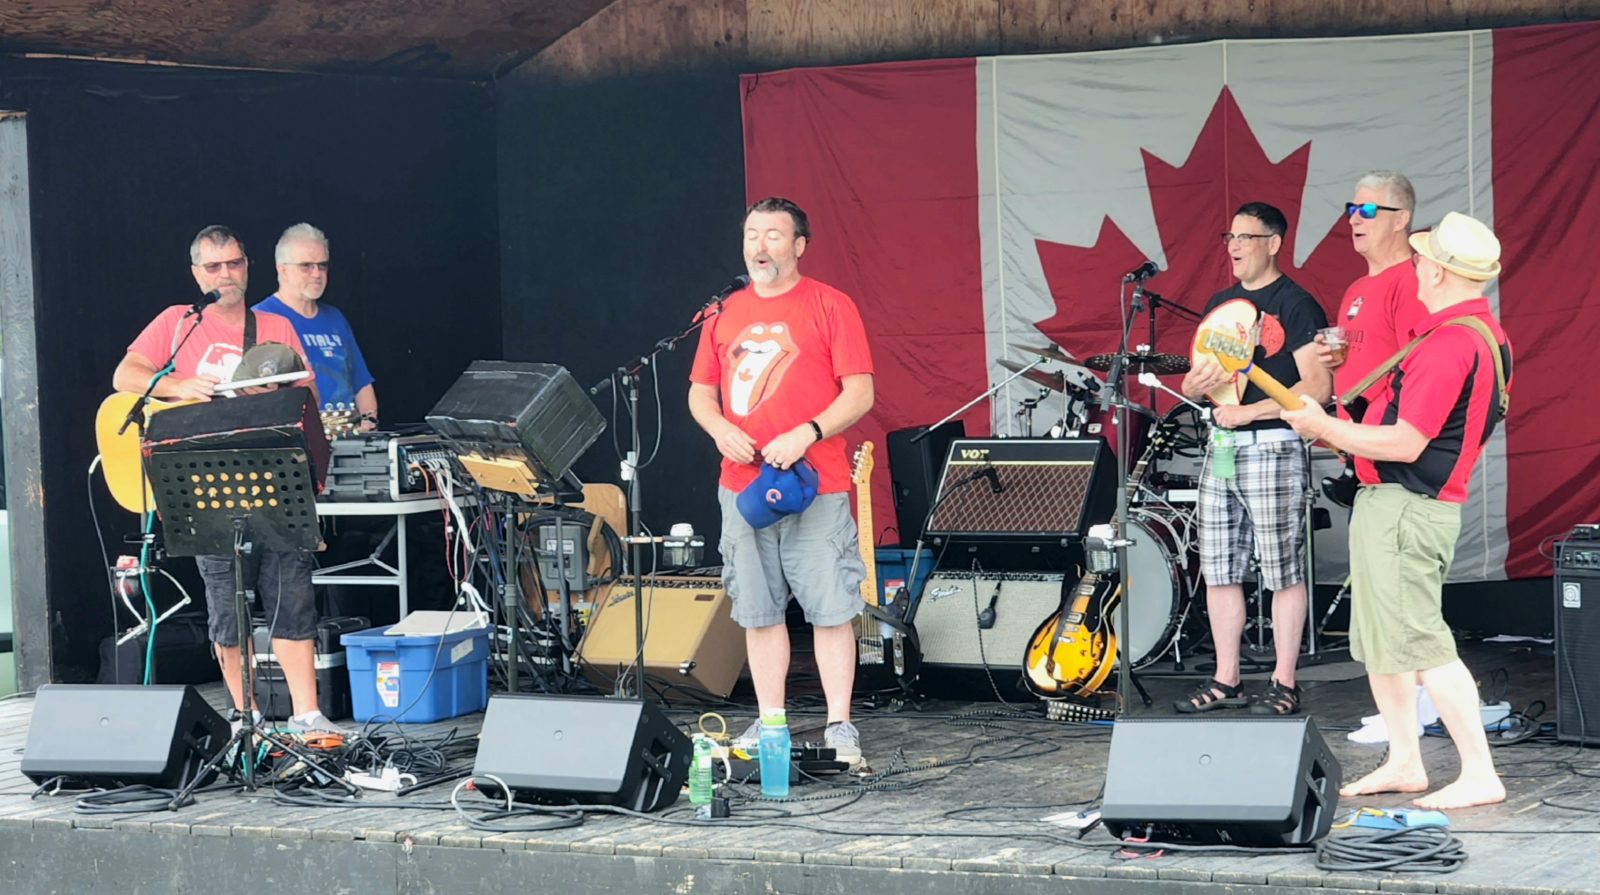 Russell Township celebrates Canada Day